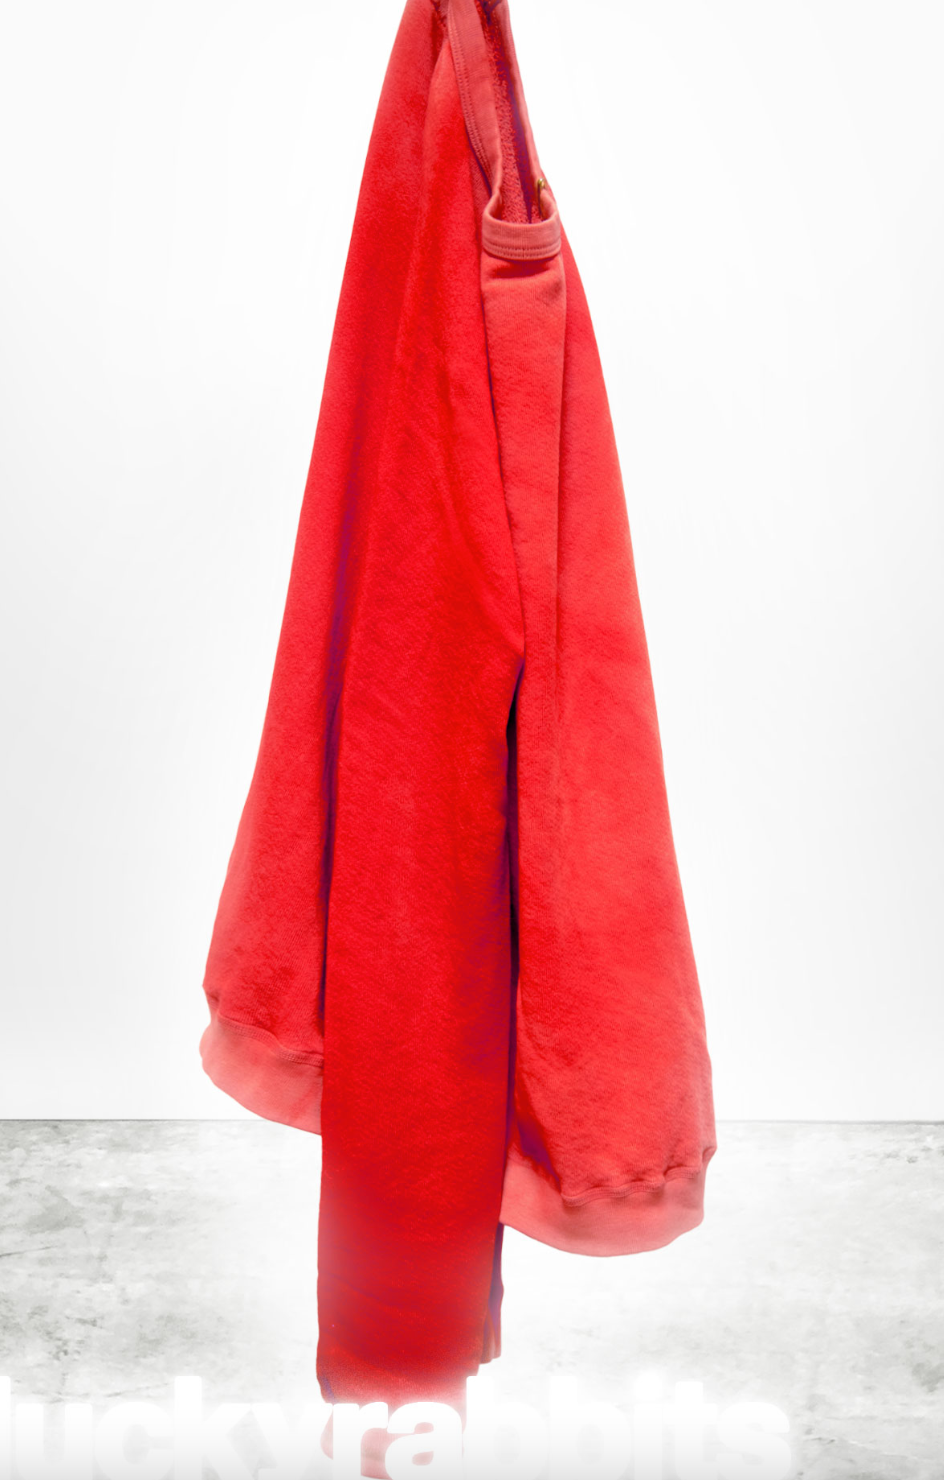 A vibrant red towel hanging on a hook against a white background with a shadow on the floor, displaying the text "Lucky Rabbits Sweatshirt" at the bottom in a bungalow by Free City (sparrow, LLC).